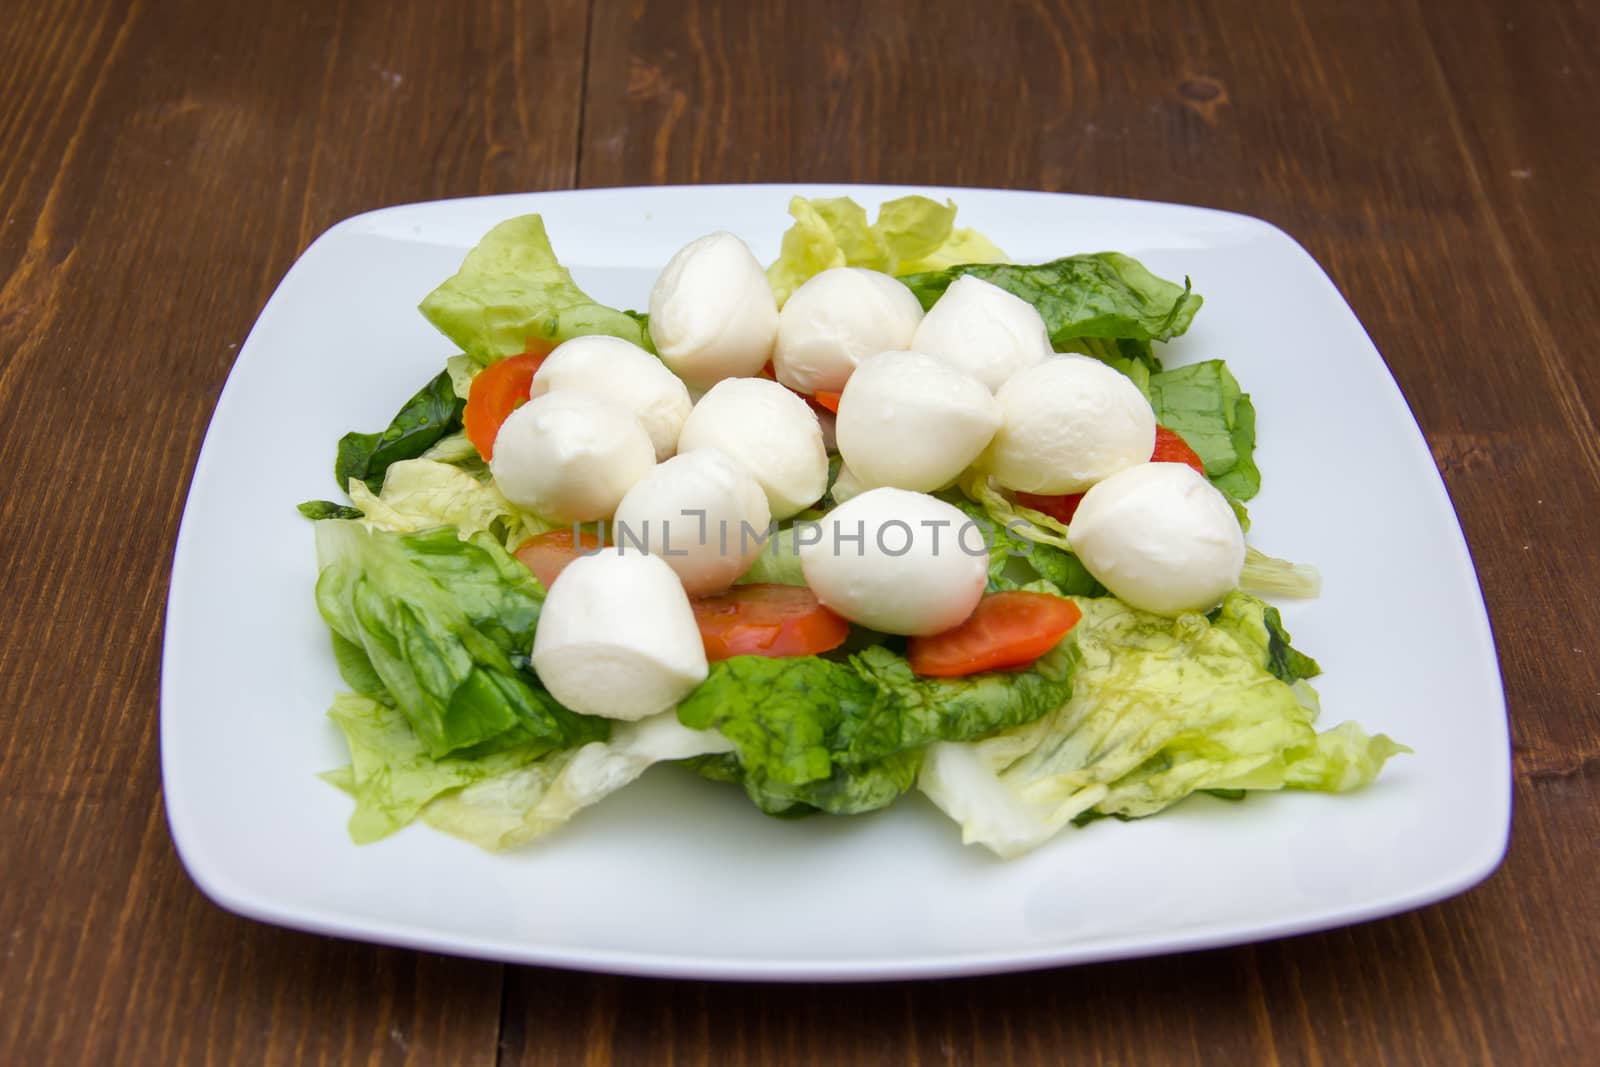 Salad with tomatoes and mozzarella on wooden table